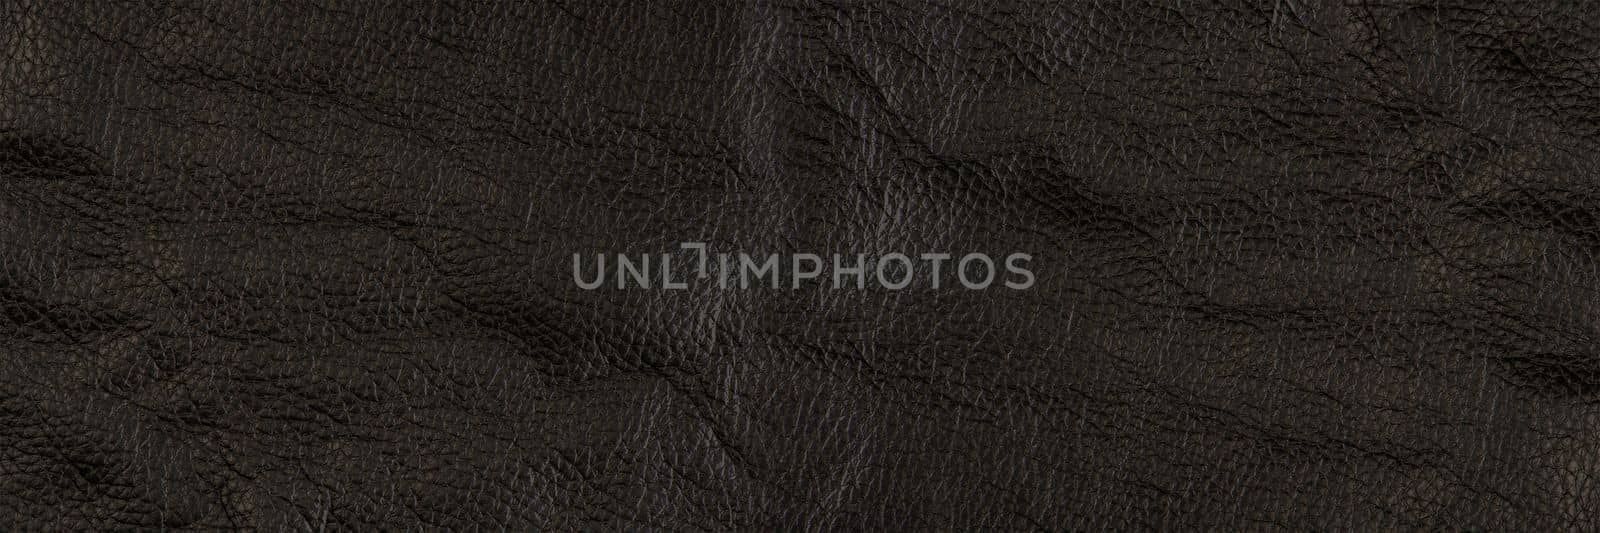 black leather texture, close-up of black genuine leather. Leather top view in folds and bumps. by SERSOL